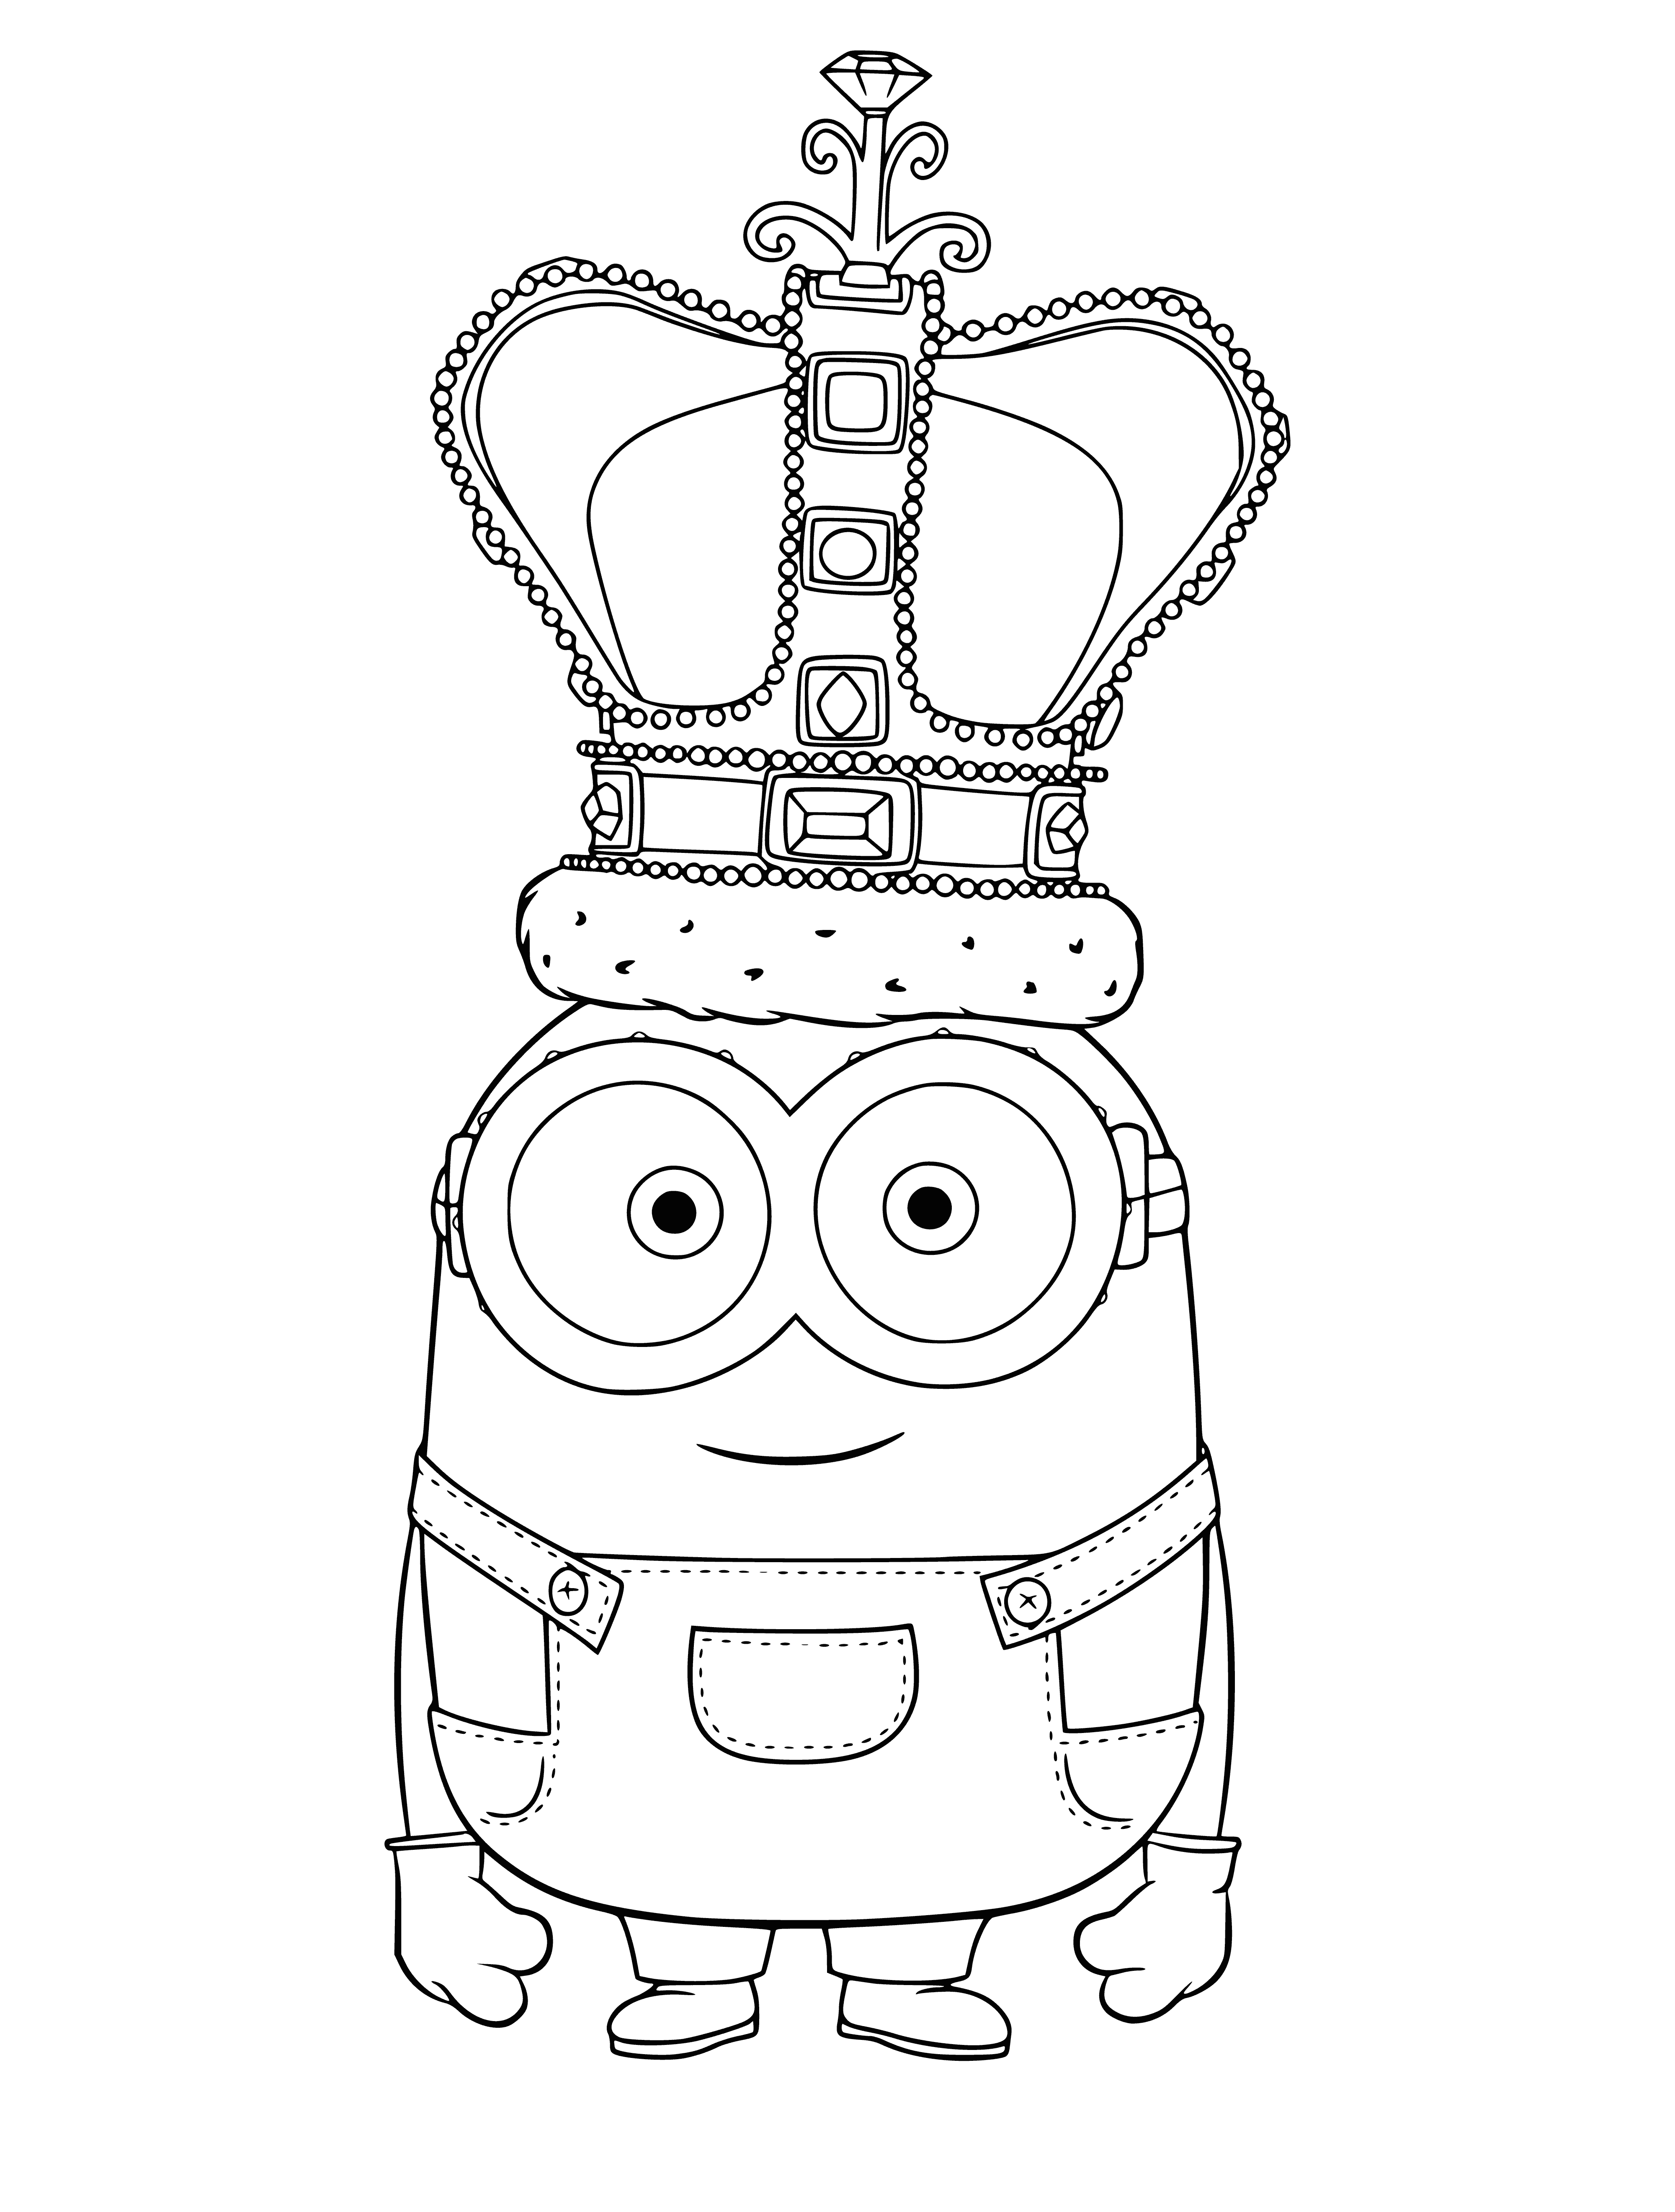 coloring page: Meet Mignon King, the fondant king surrounded by four minions! #minions #fondant